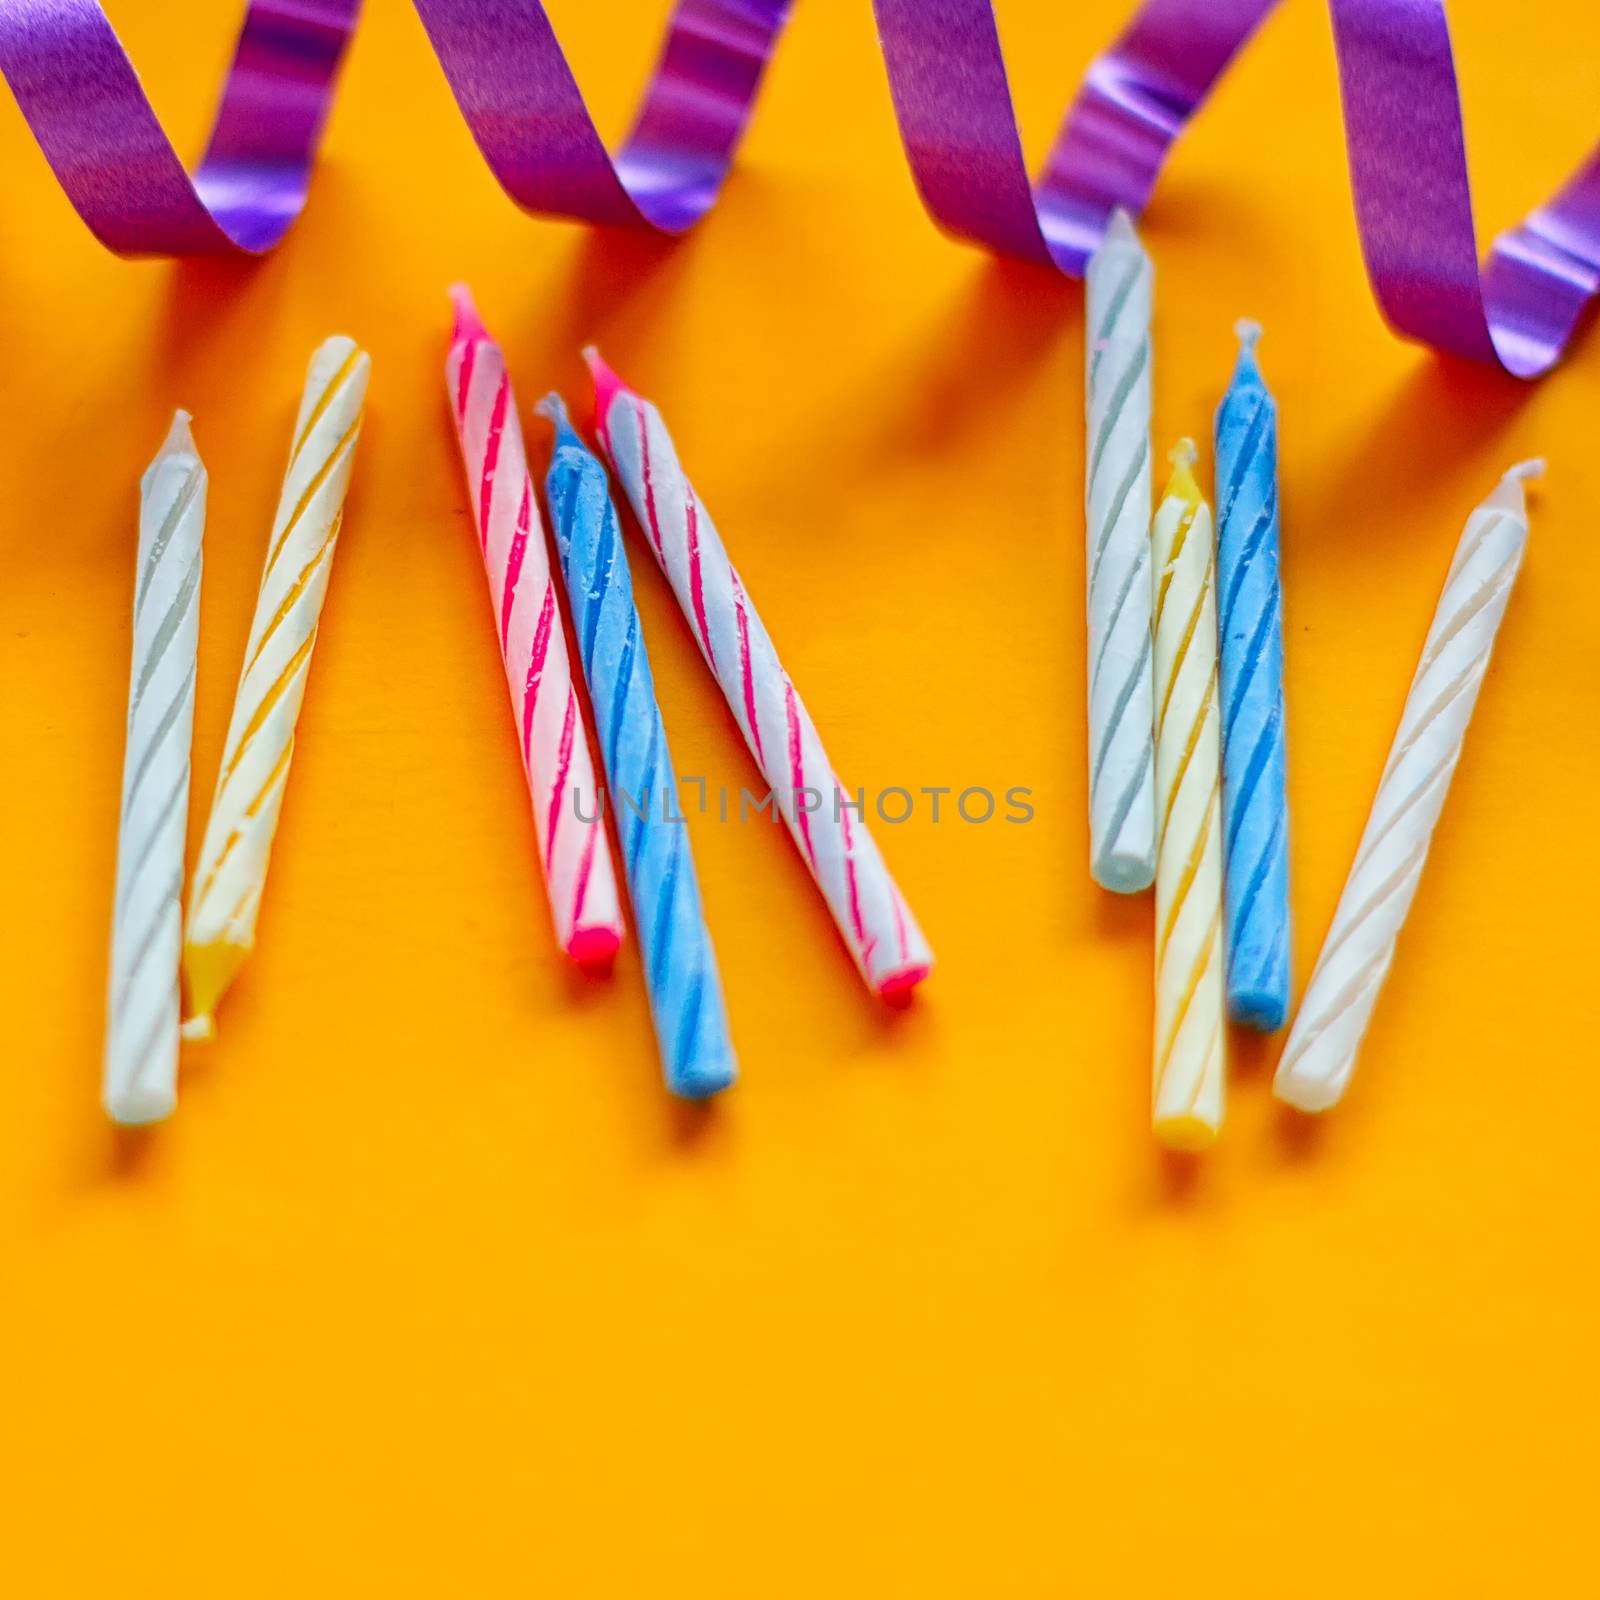 Candles and streamer on a yellow background